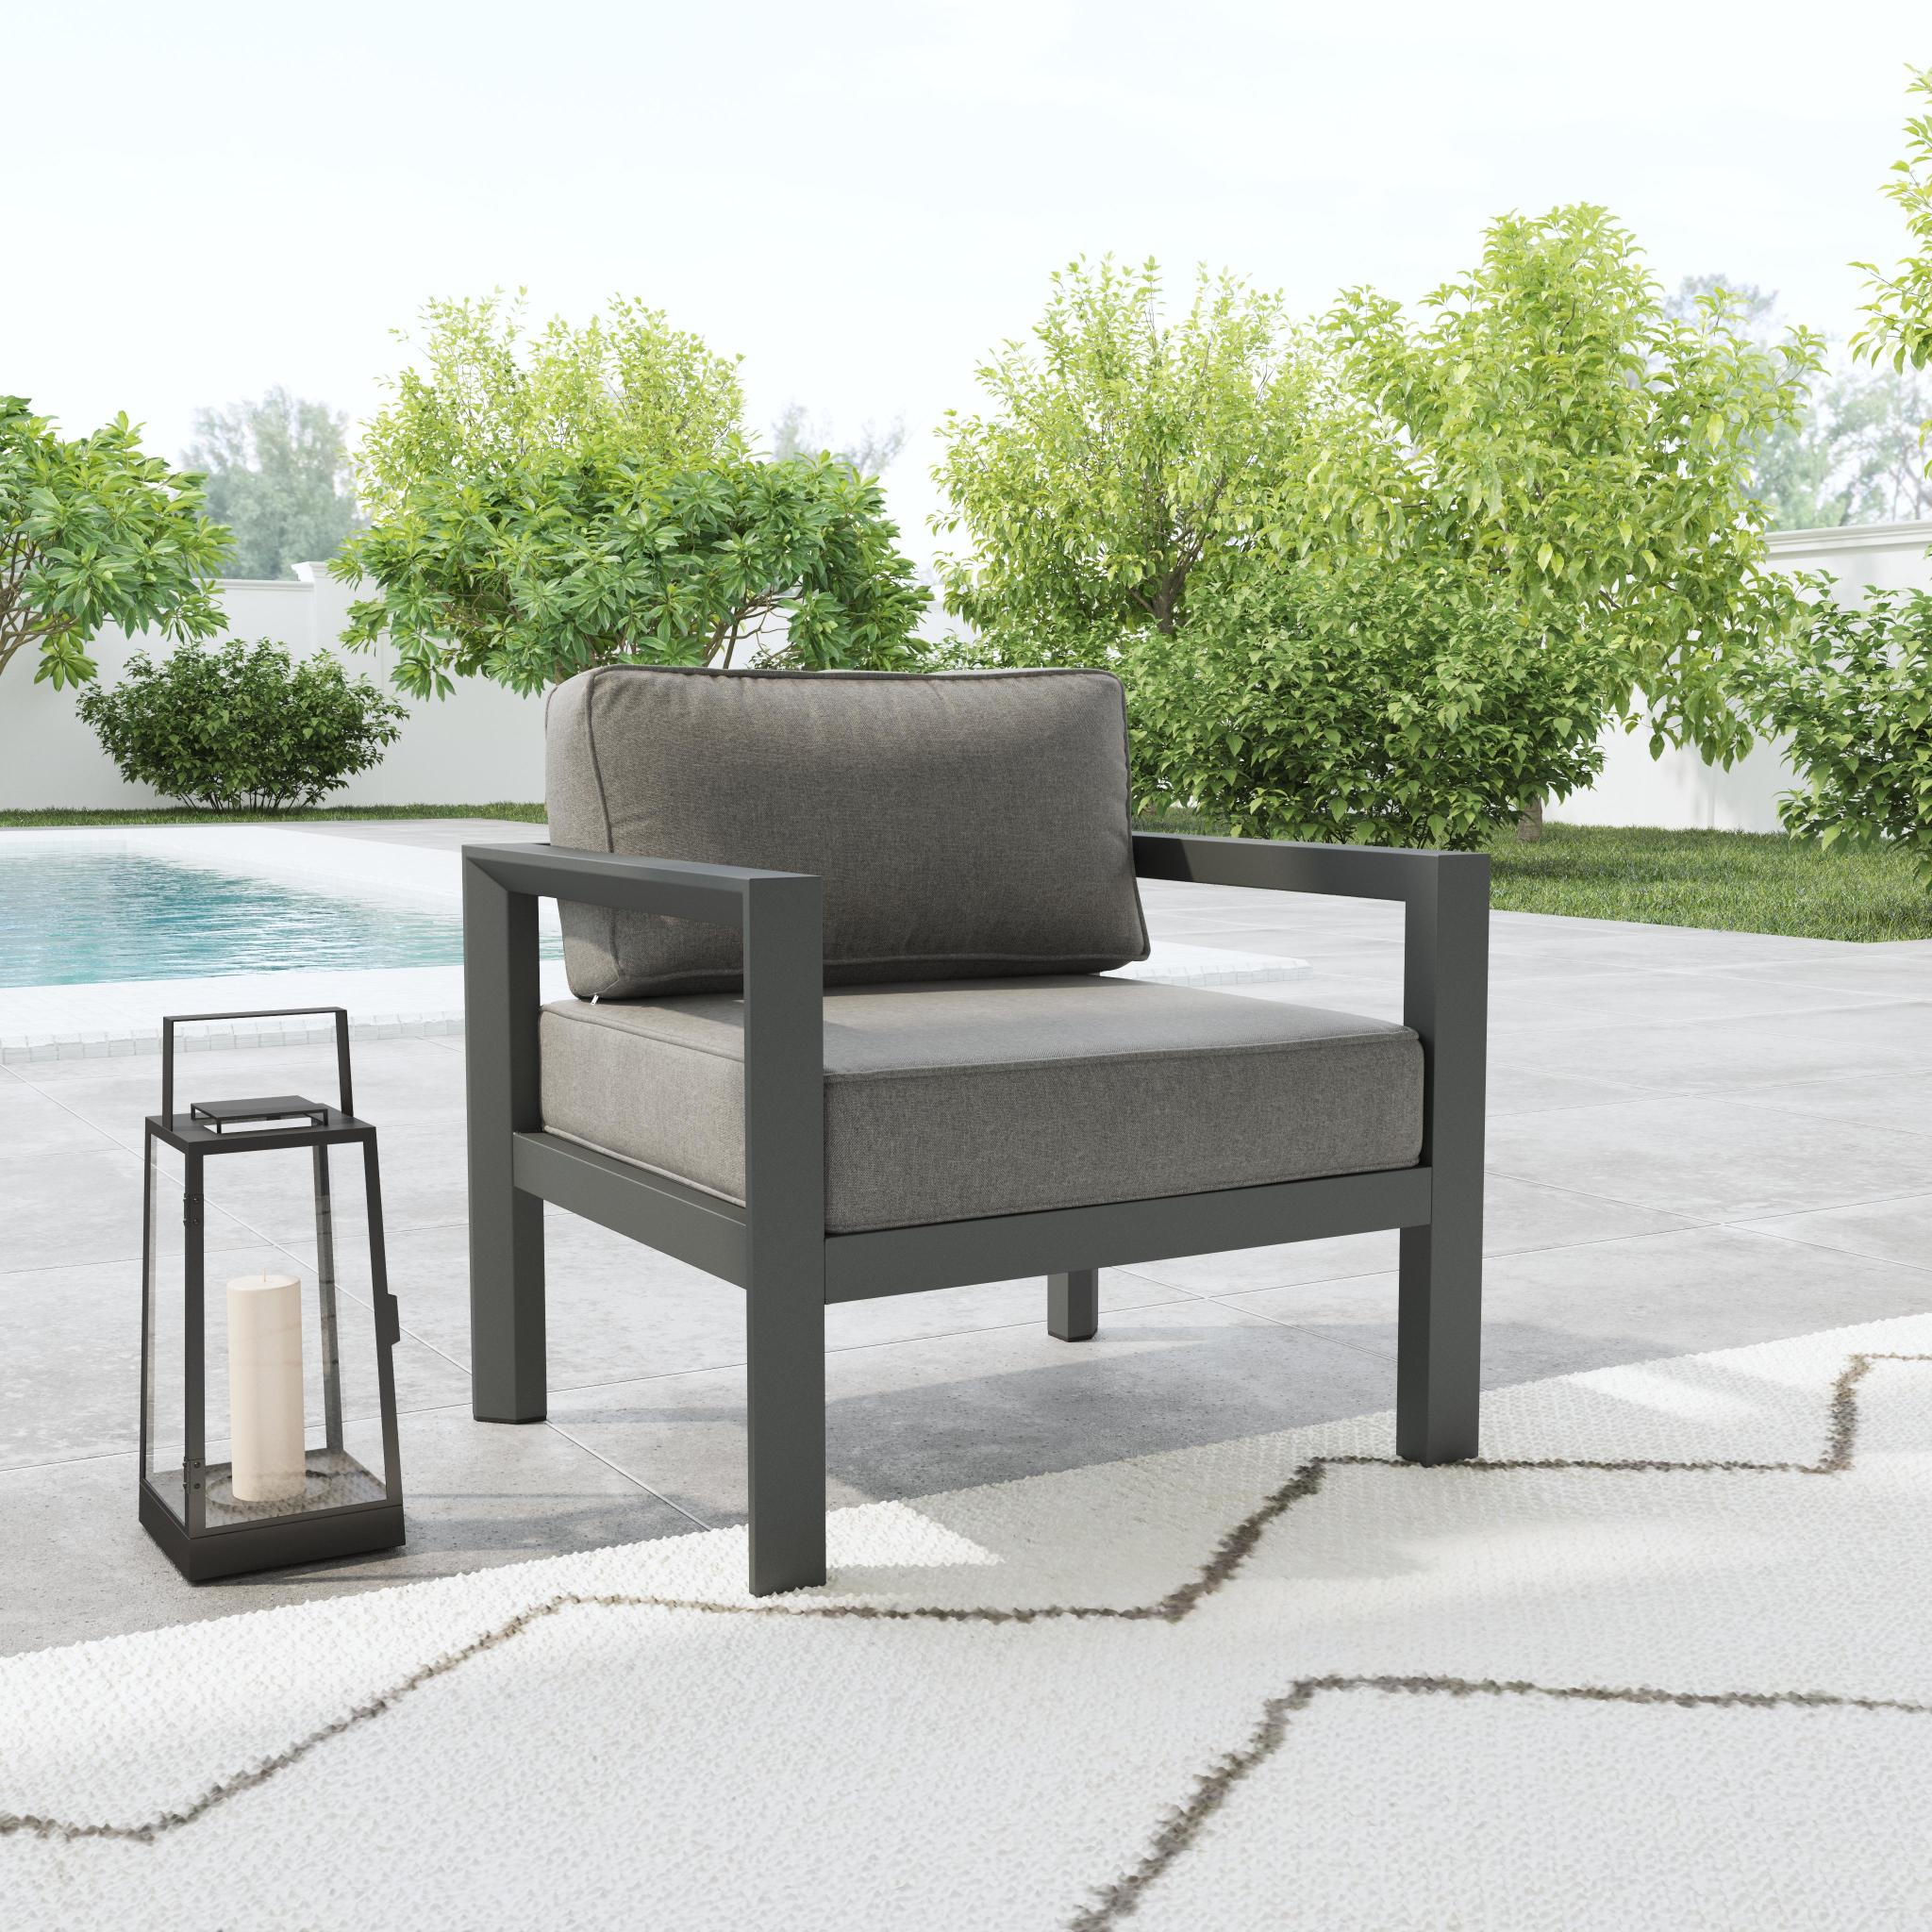 Homestyles Grayton Aluminum Outdoor Aluminum Lounge Chair in Gray - image 2 of 10